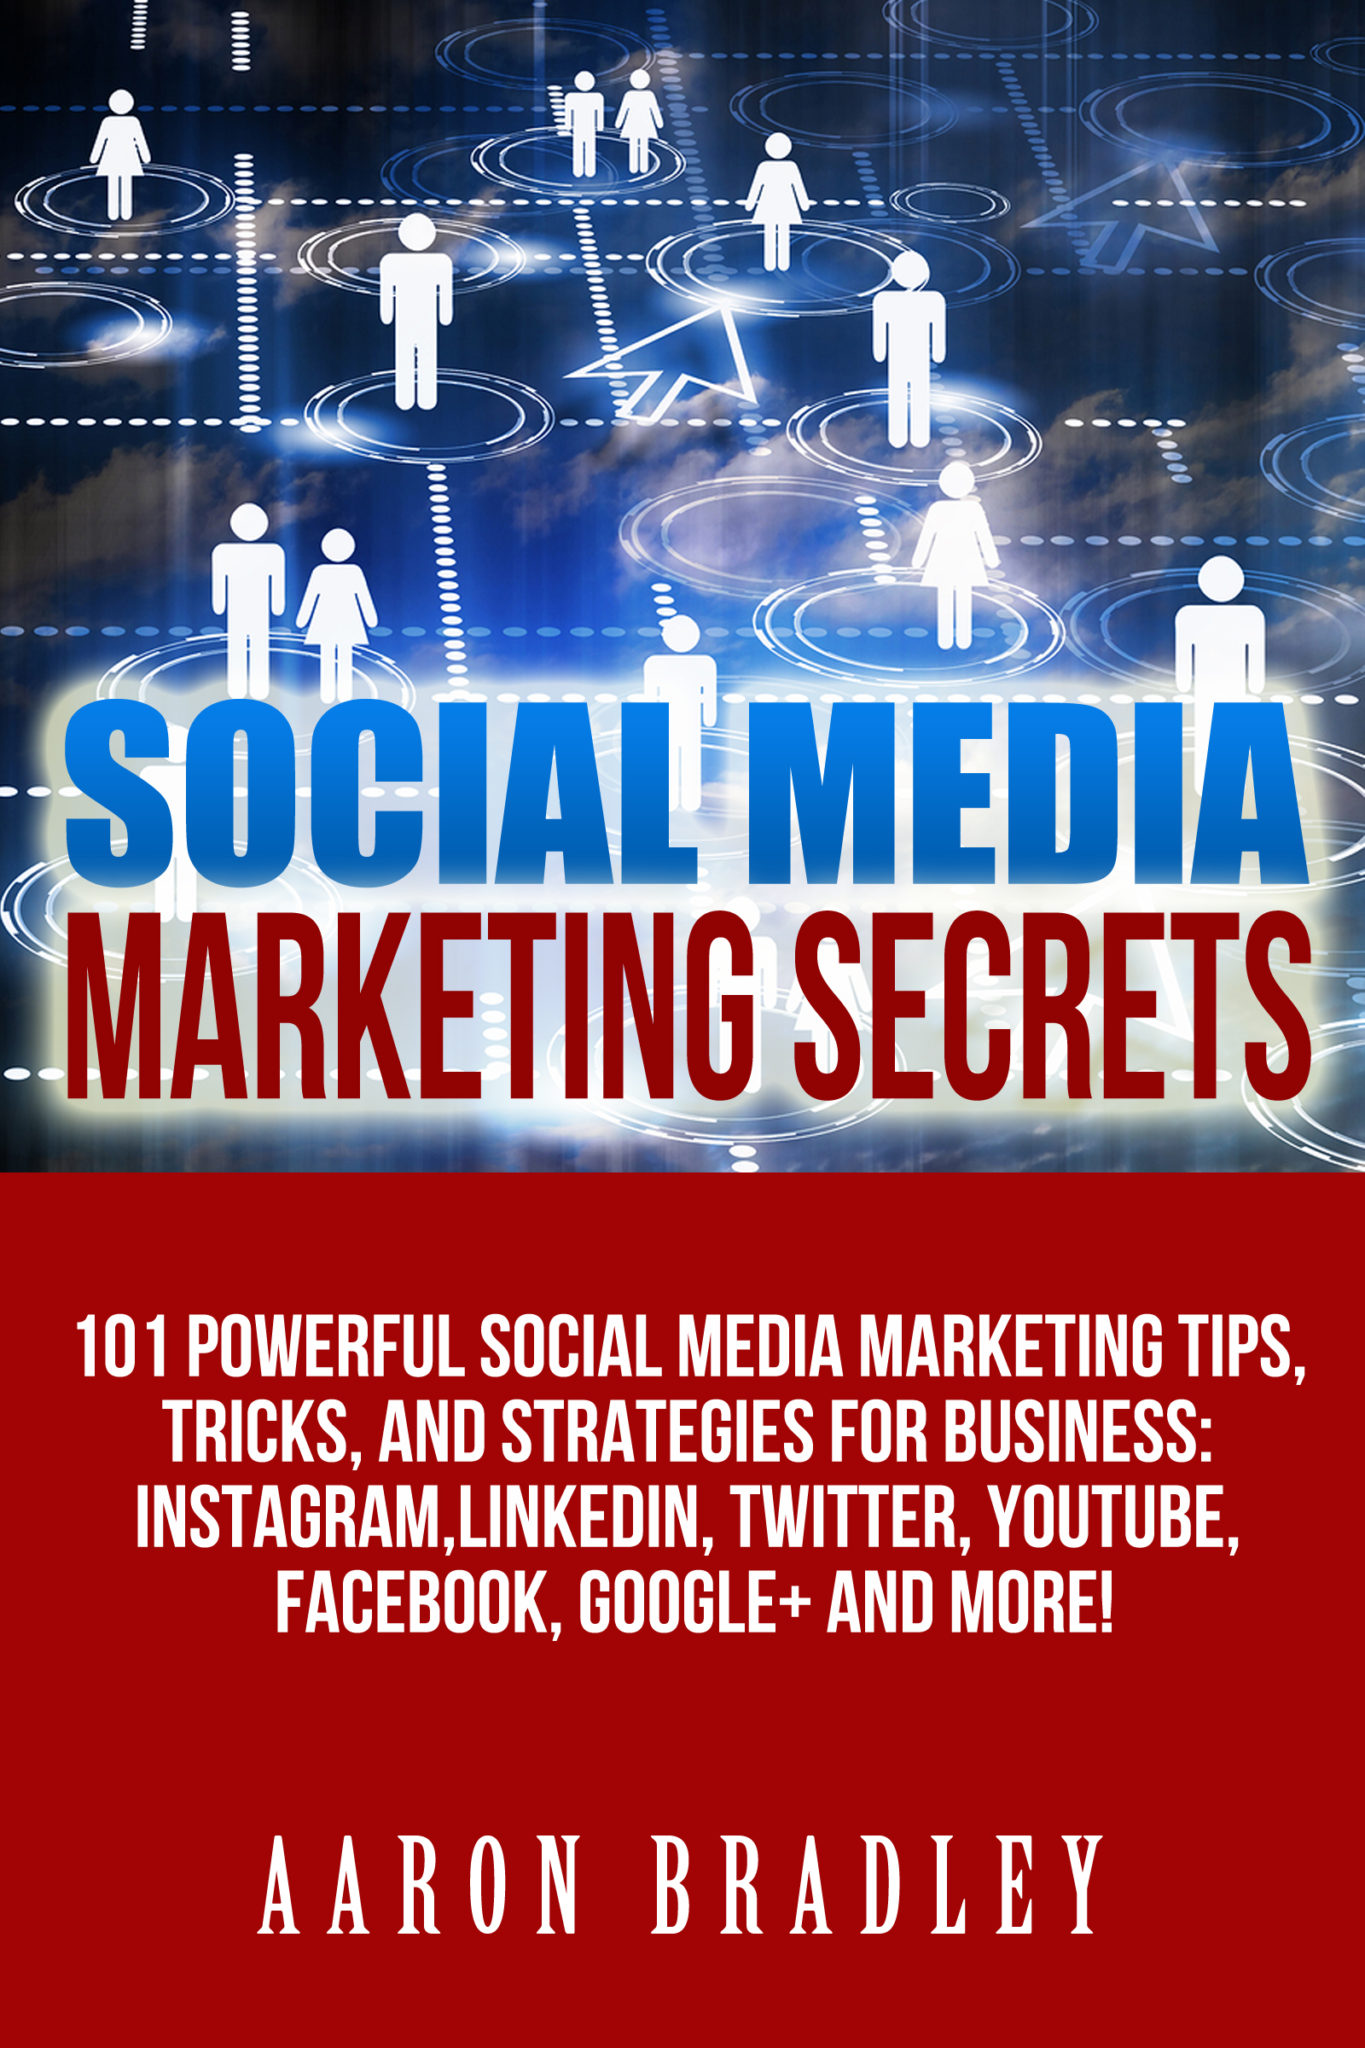 Social Media Marketing: 101 Powerful Social Media Marketing Tips, Tricks, And Strategies For Business: Instagram, LinkedIn, Twitter, YouTube, Facebook, Google+ and More! by Aaron Bradley